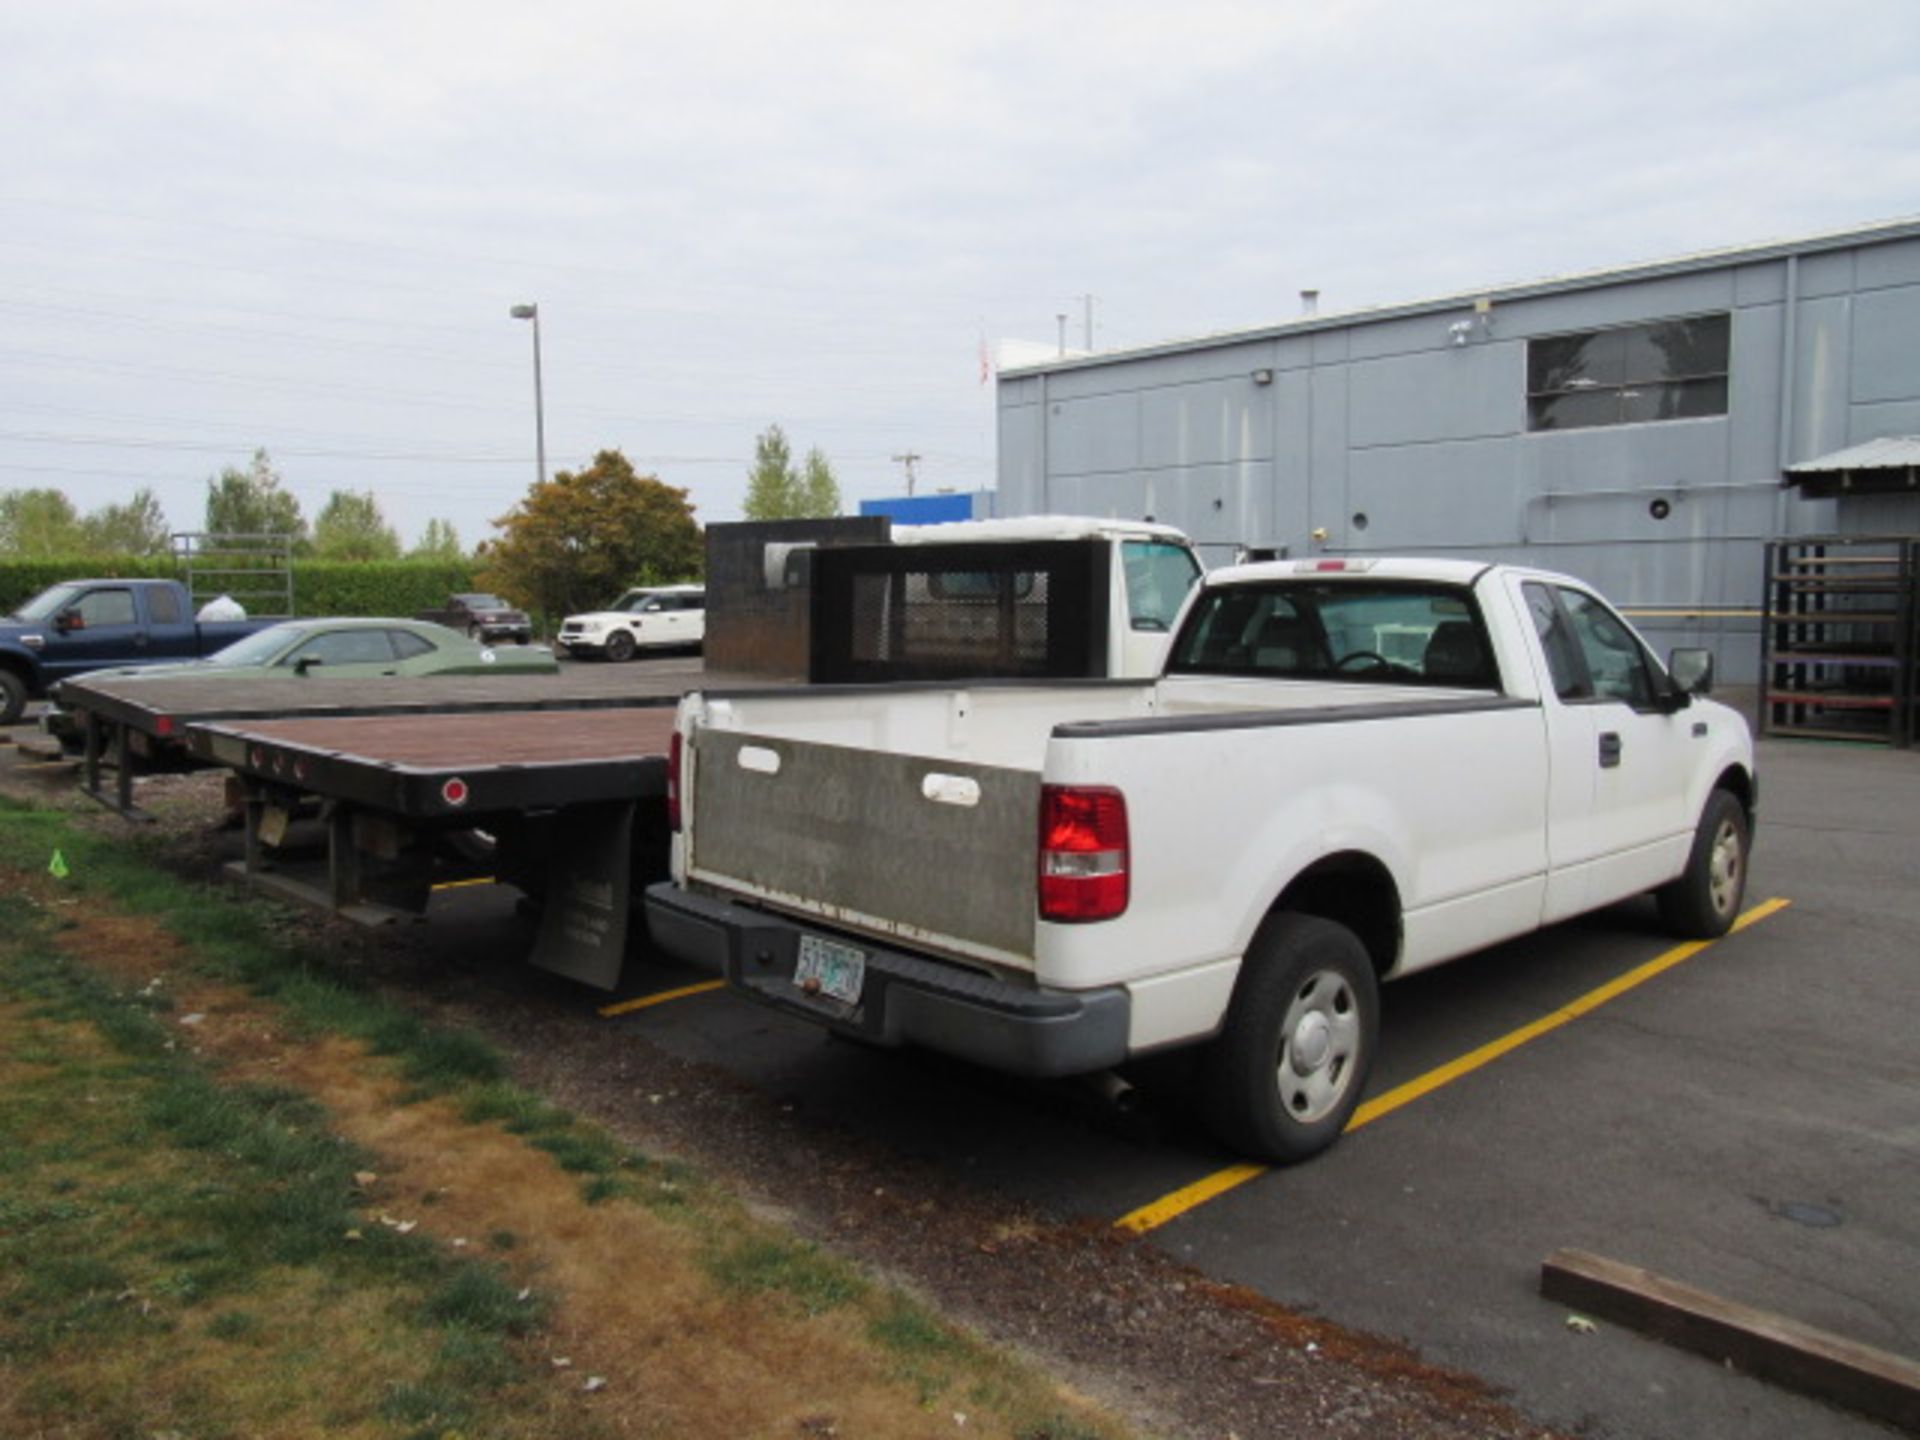 Ford F-150 Pickup Truck - Image 3 of 10